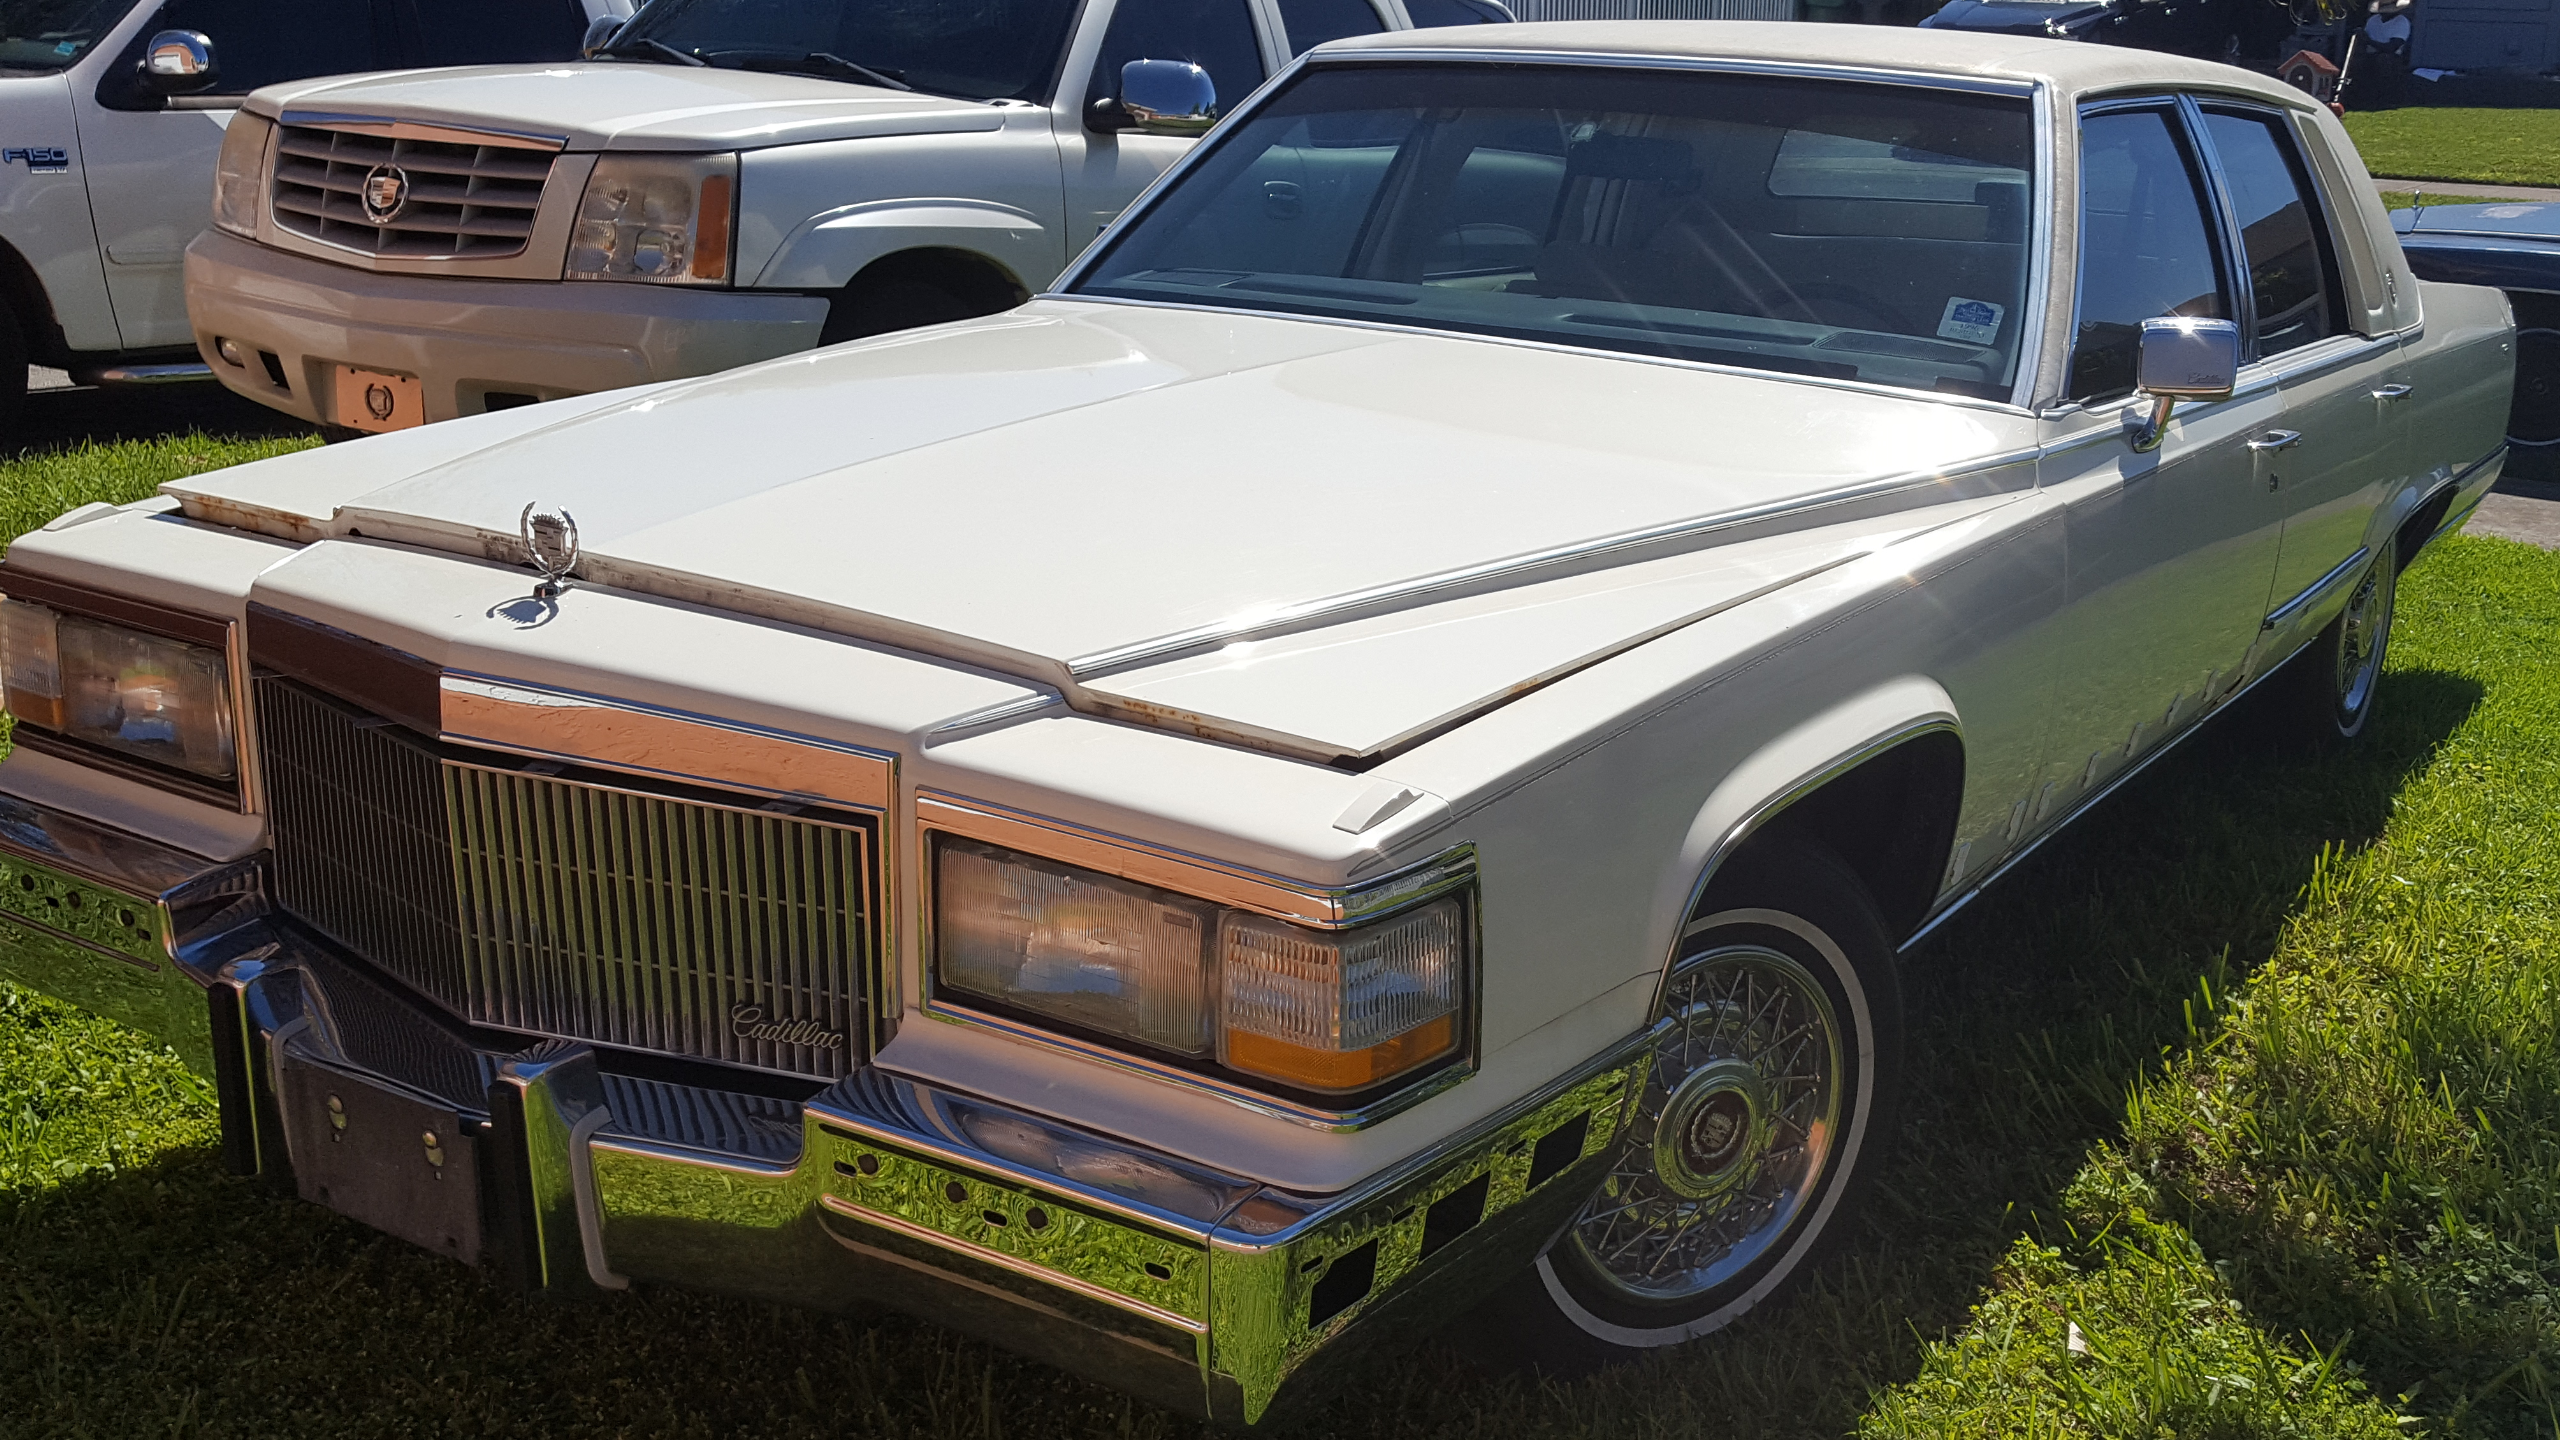 PARTING OUT... 1990 1991 1992 Cadillac Fleetwood Brougham 1989 1988 1987 1986 1985 1984 1983 1982 Deville RWD.